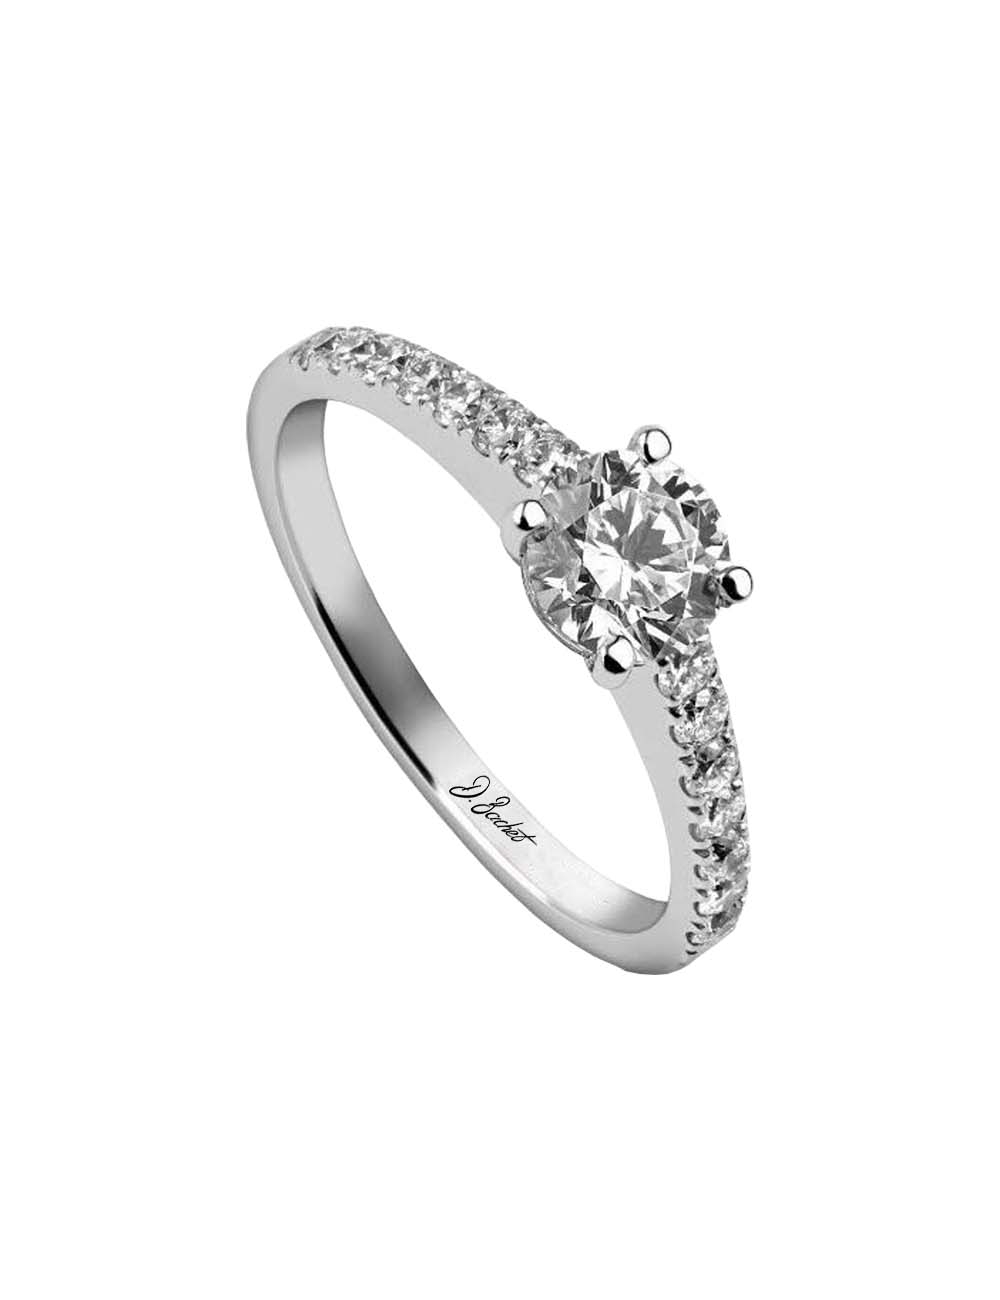 Engagement ring set with a 0.50 carat brilliant-cut white diamond and prong set white diamonds.